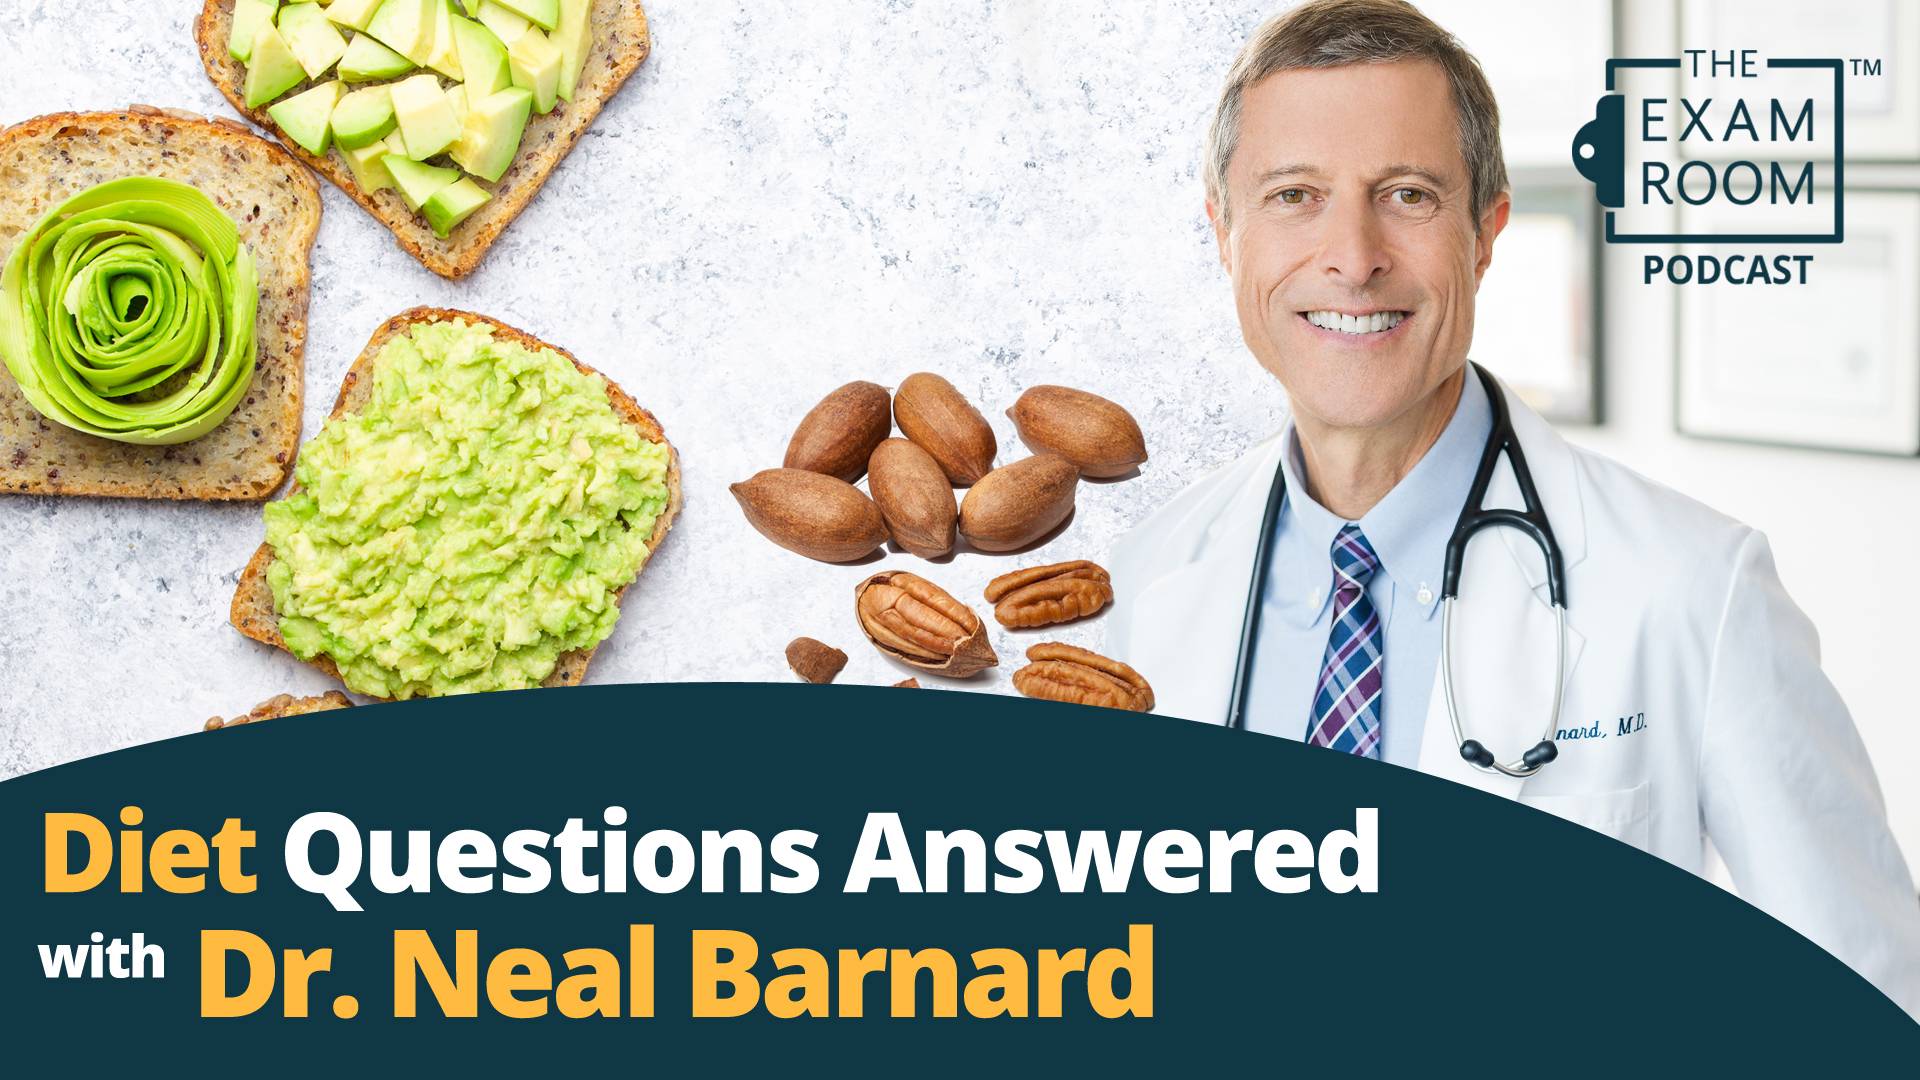 Dr. Neal Barnard Q&A: How Much Fat Is Too Much Fat, Smoothies and Blood Sugar, and When Eating Organic Matters